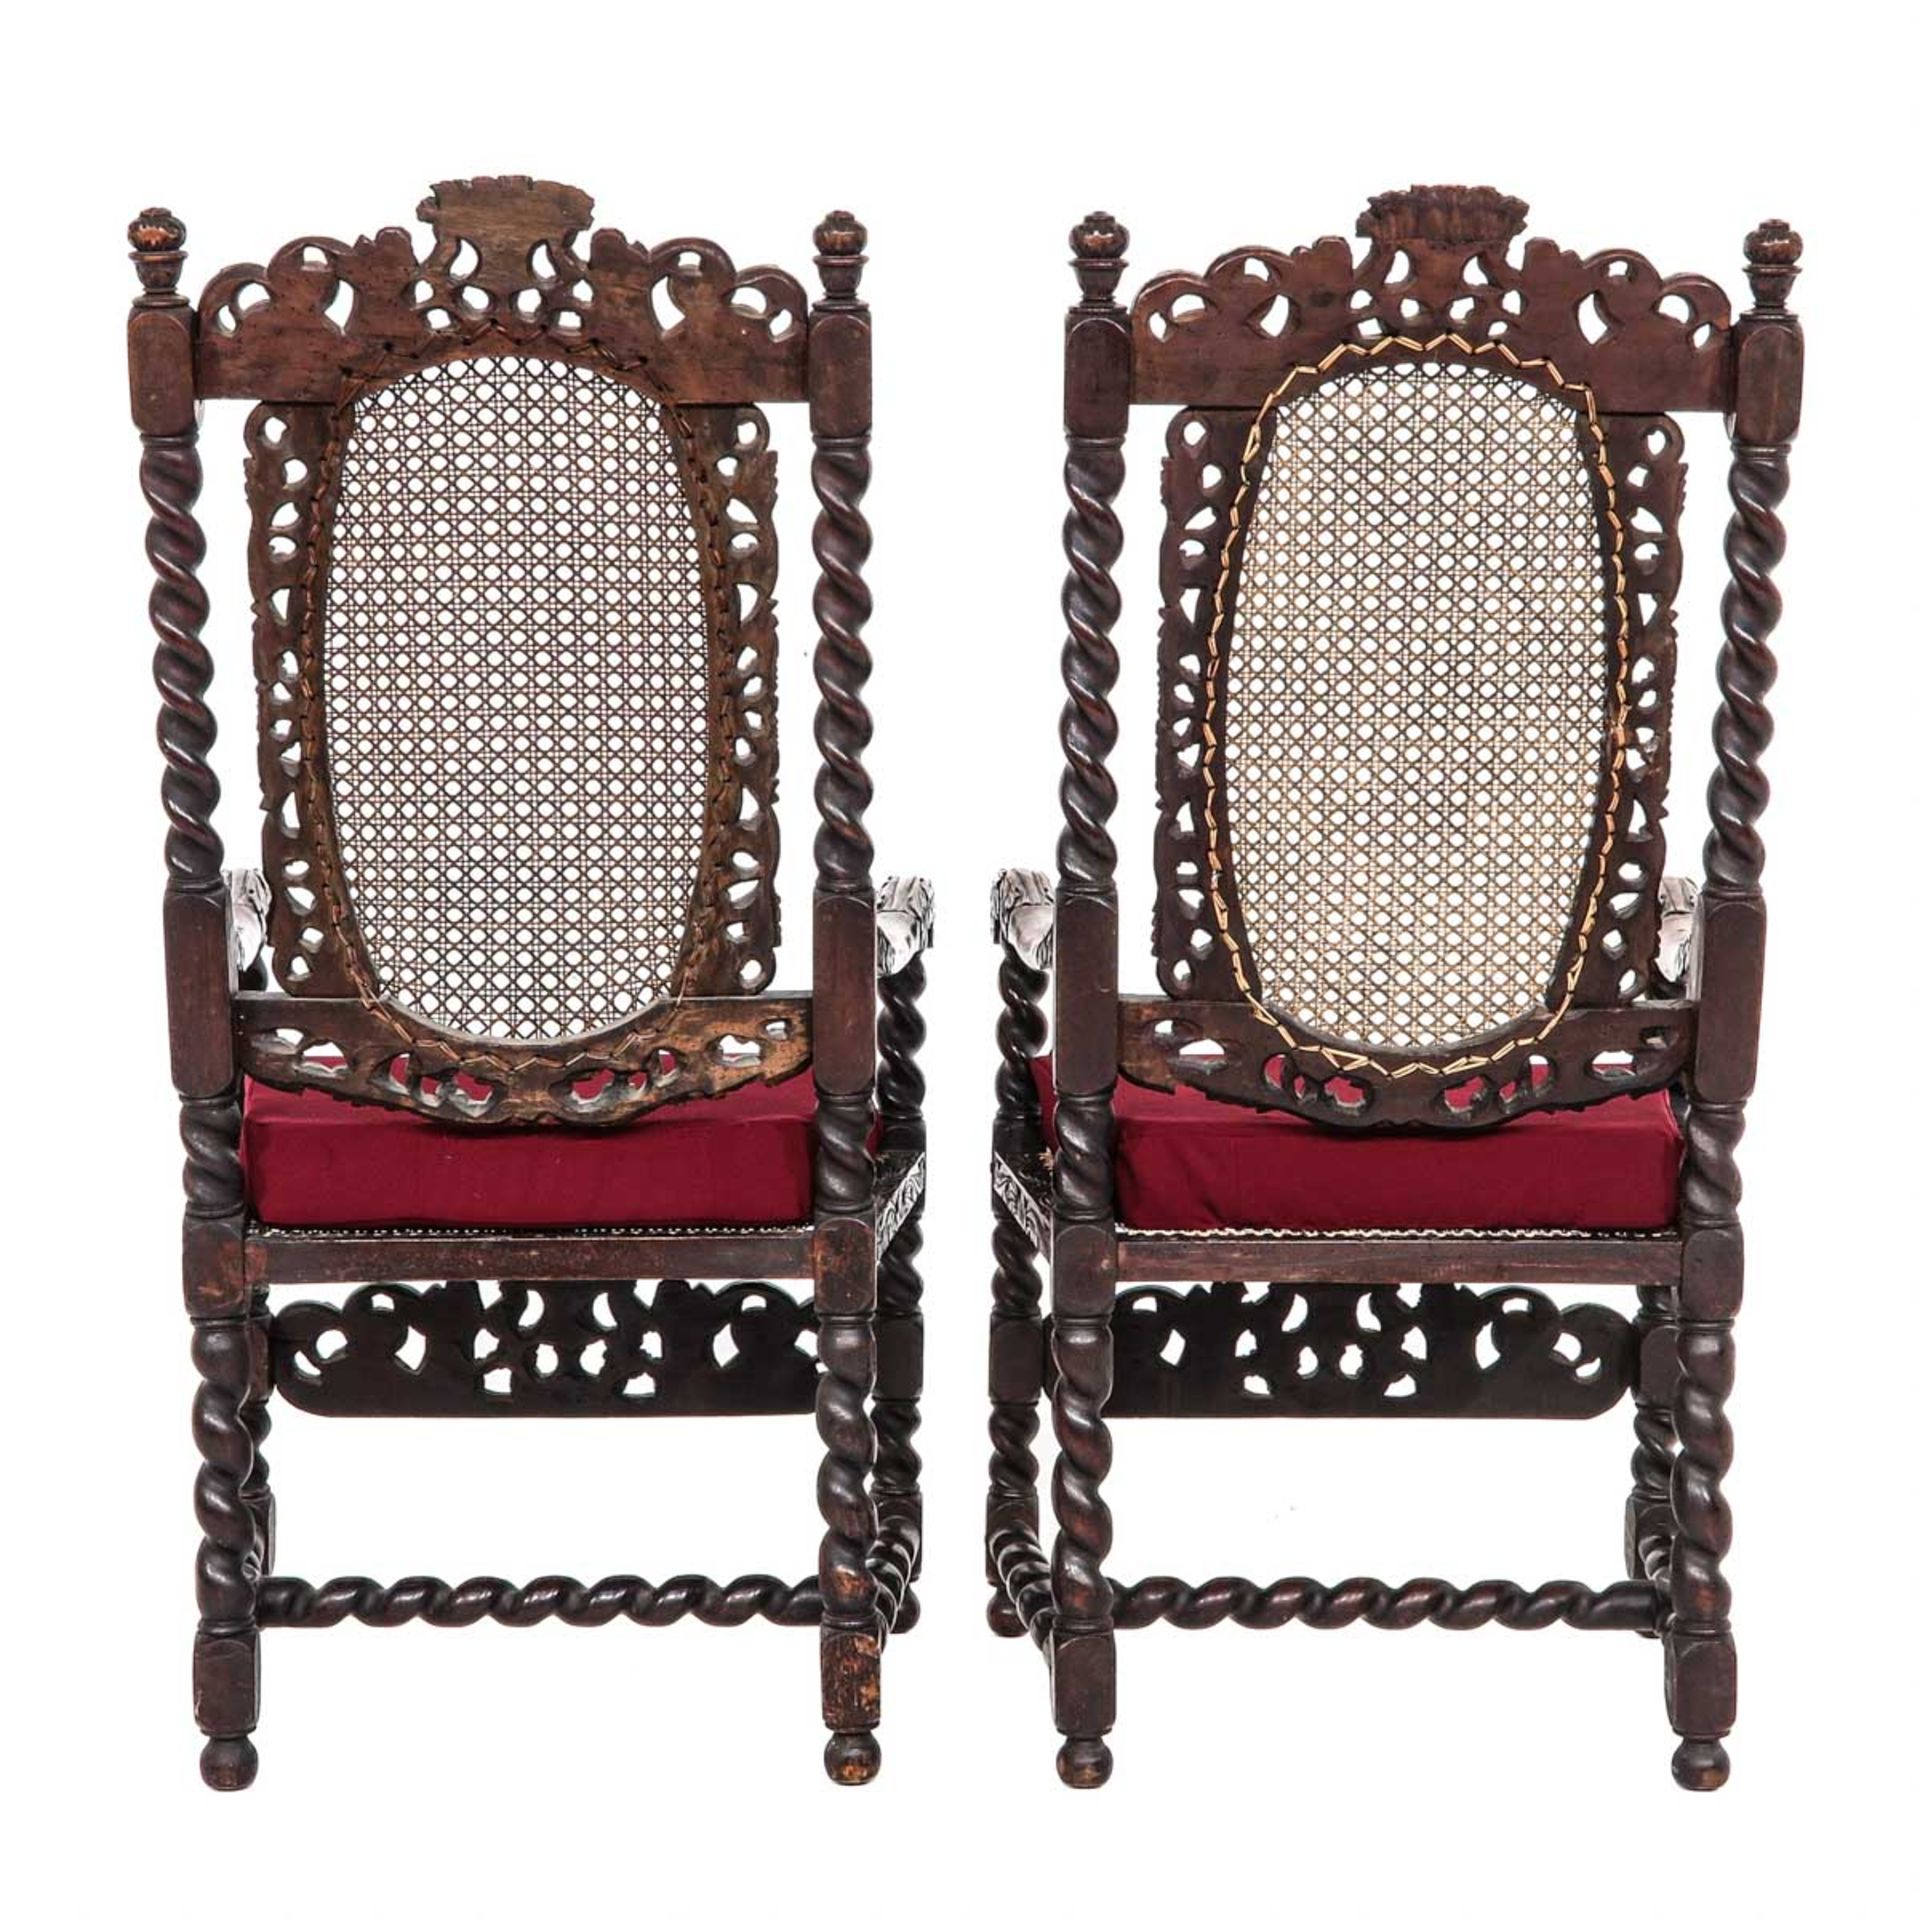 A Pair of William and Mary Chairs - Image 3 of 10